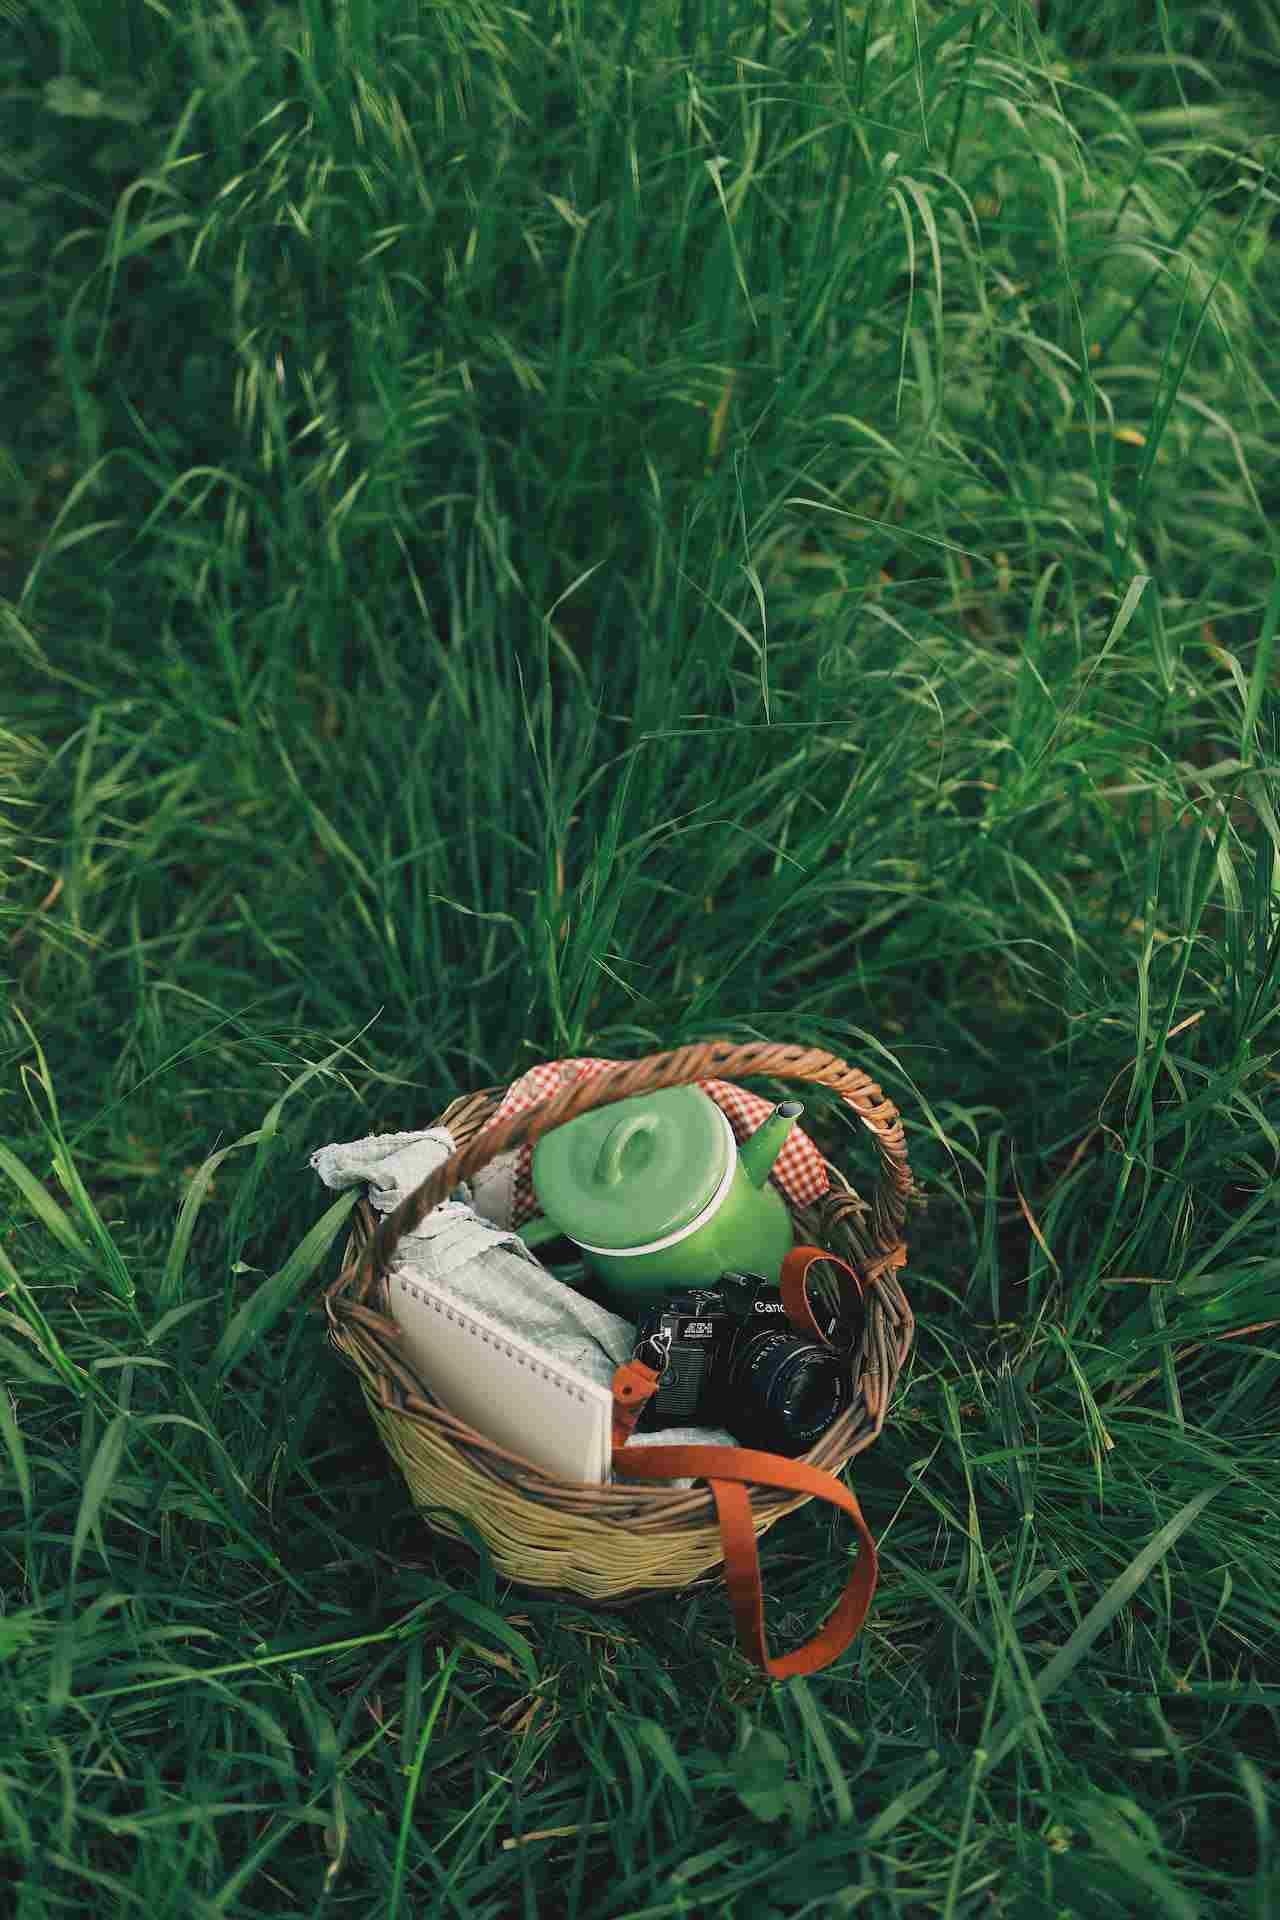 Baskets with Gadgets, A basket with a camera, camera bag, and camera on the grass.